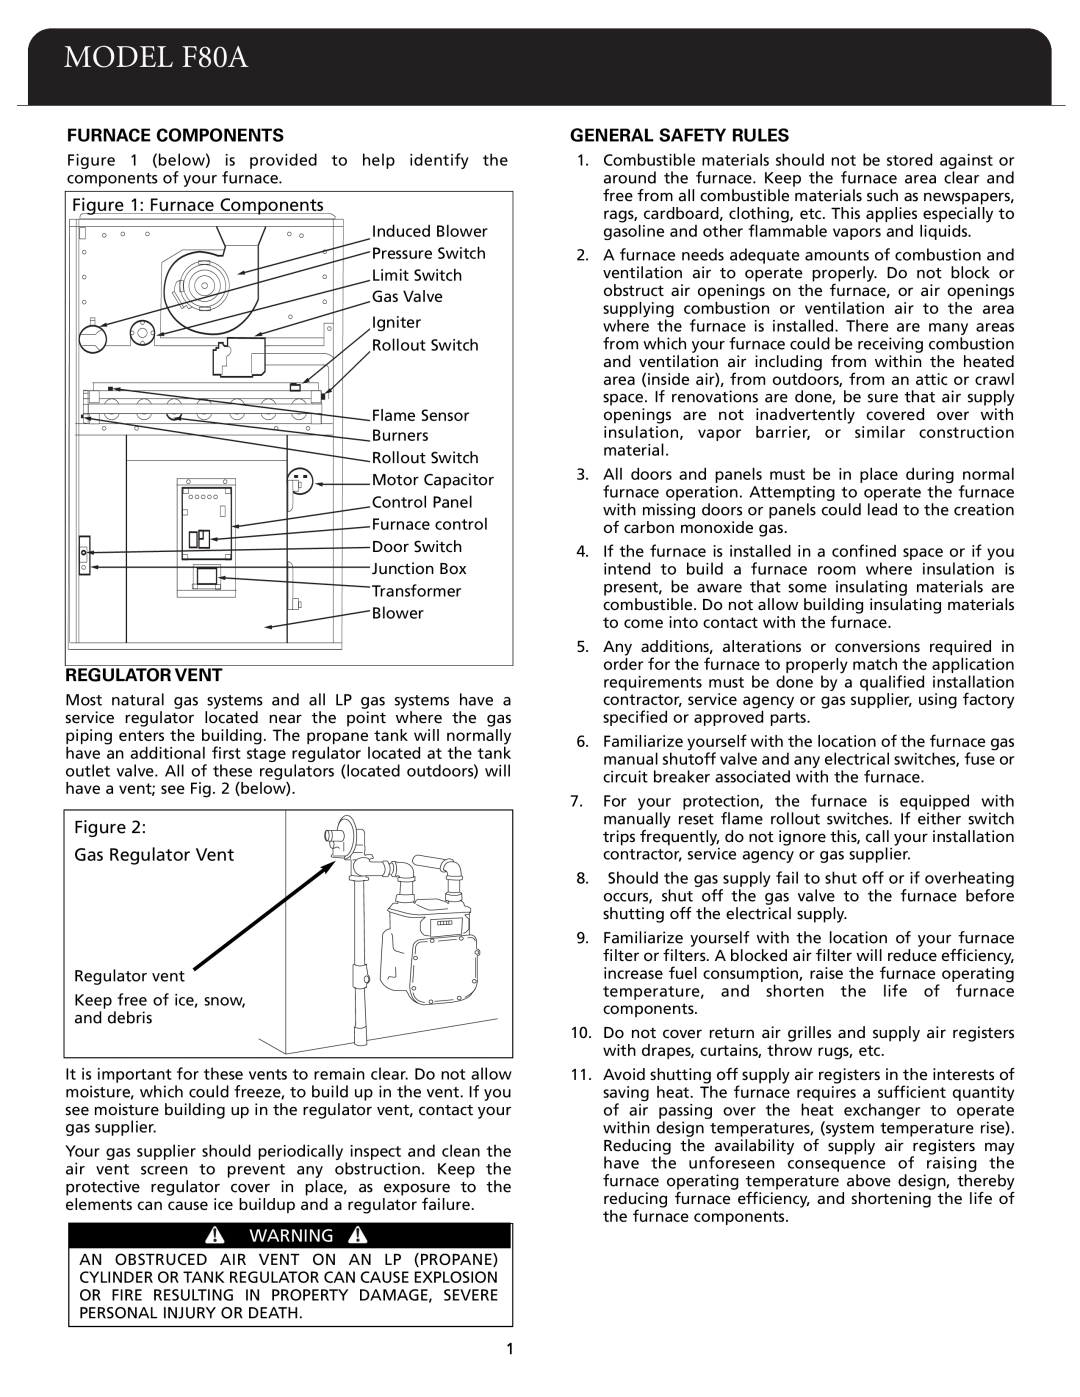 Fedders dimensions Furnace Components, Figure Gas Regulator Vent, General Safety Rules, MODEL F80A 